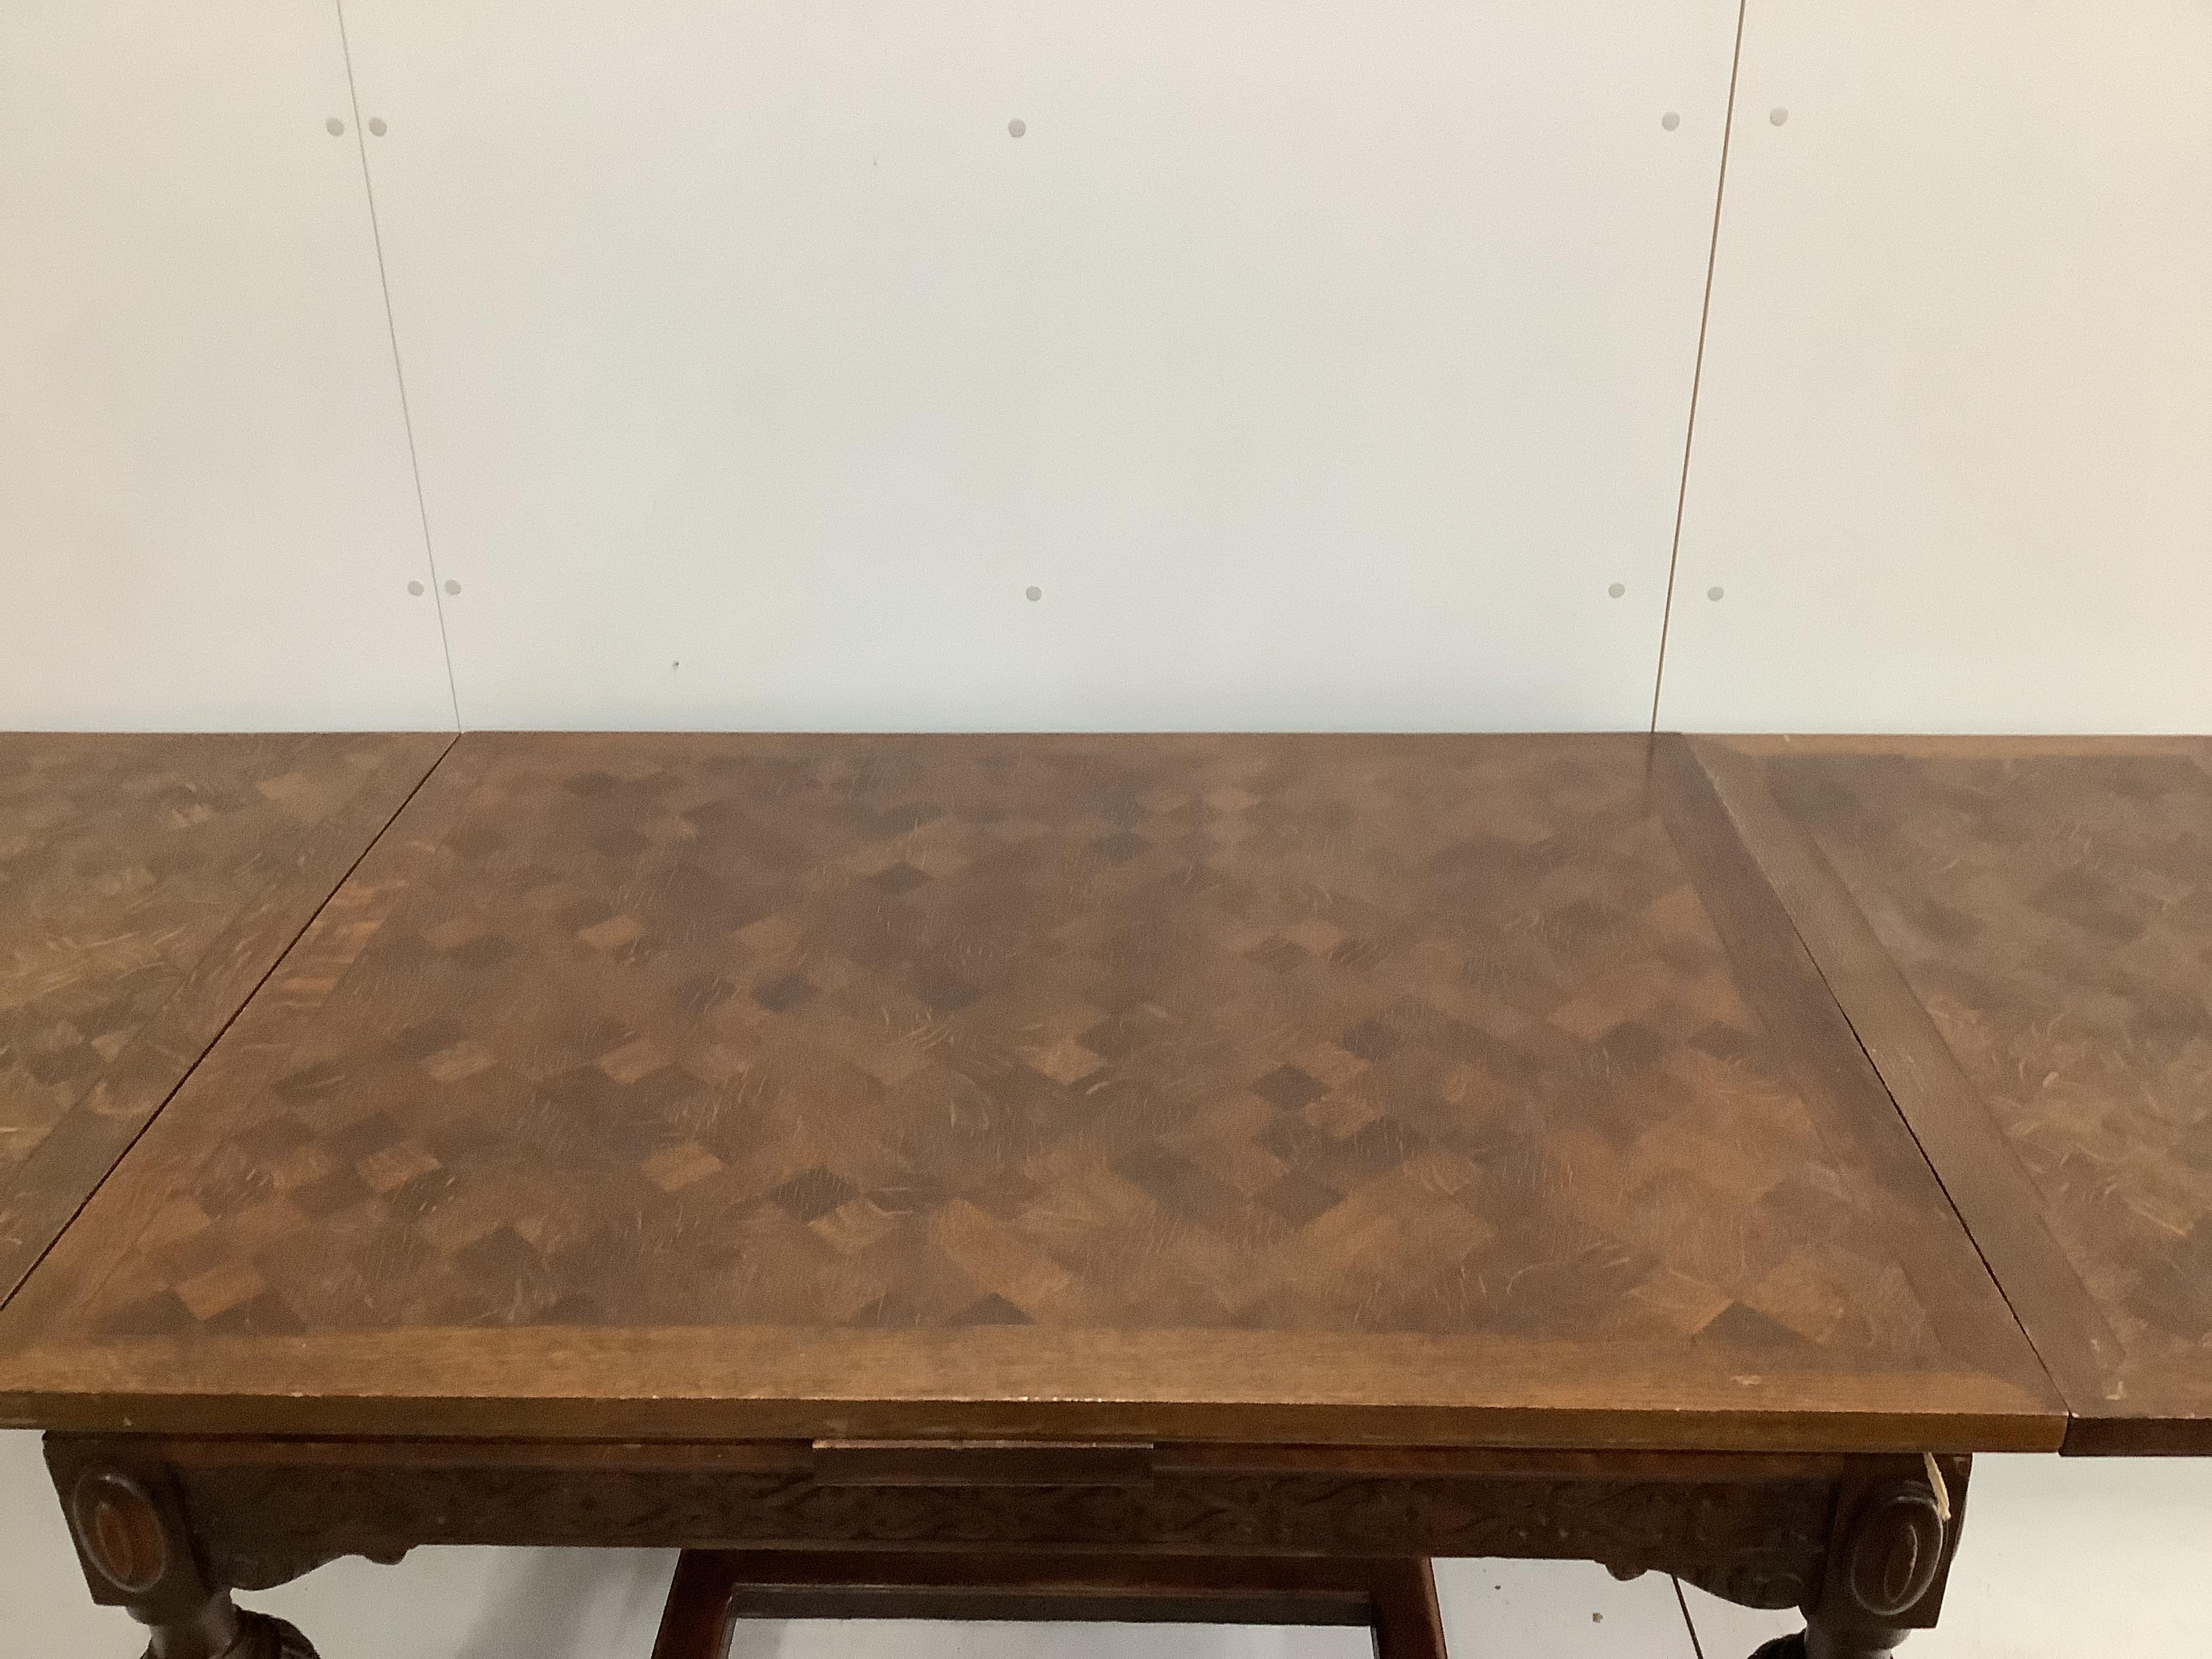 A Jacobean Revival parquetry inlaid rectangular oak draw leaf dining table, 220cm extended, depth 94cm, height 78cm together with six 1920's oak dining chairs, two with arms